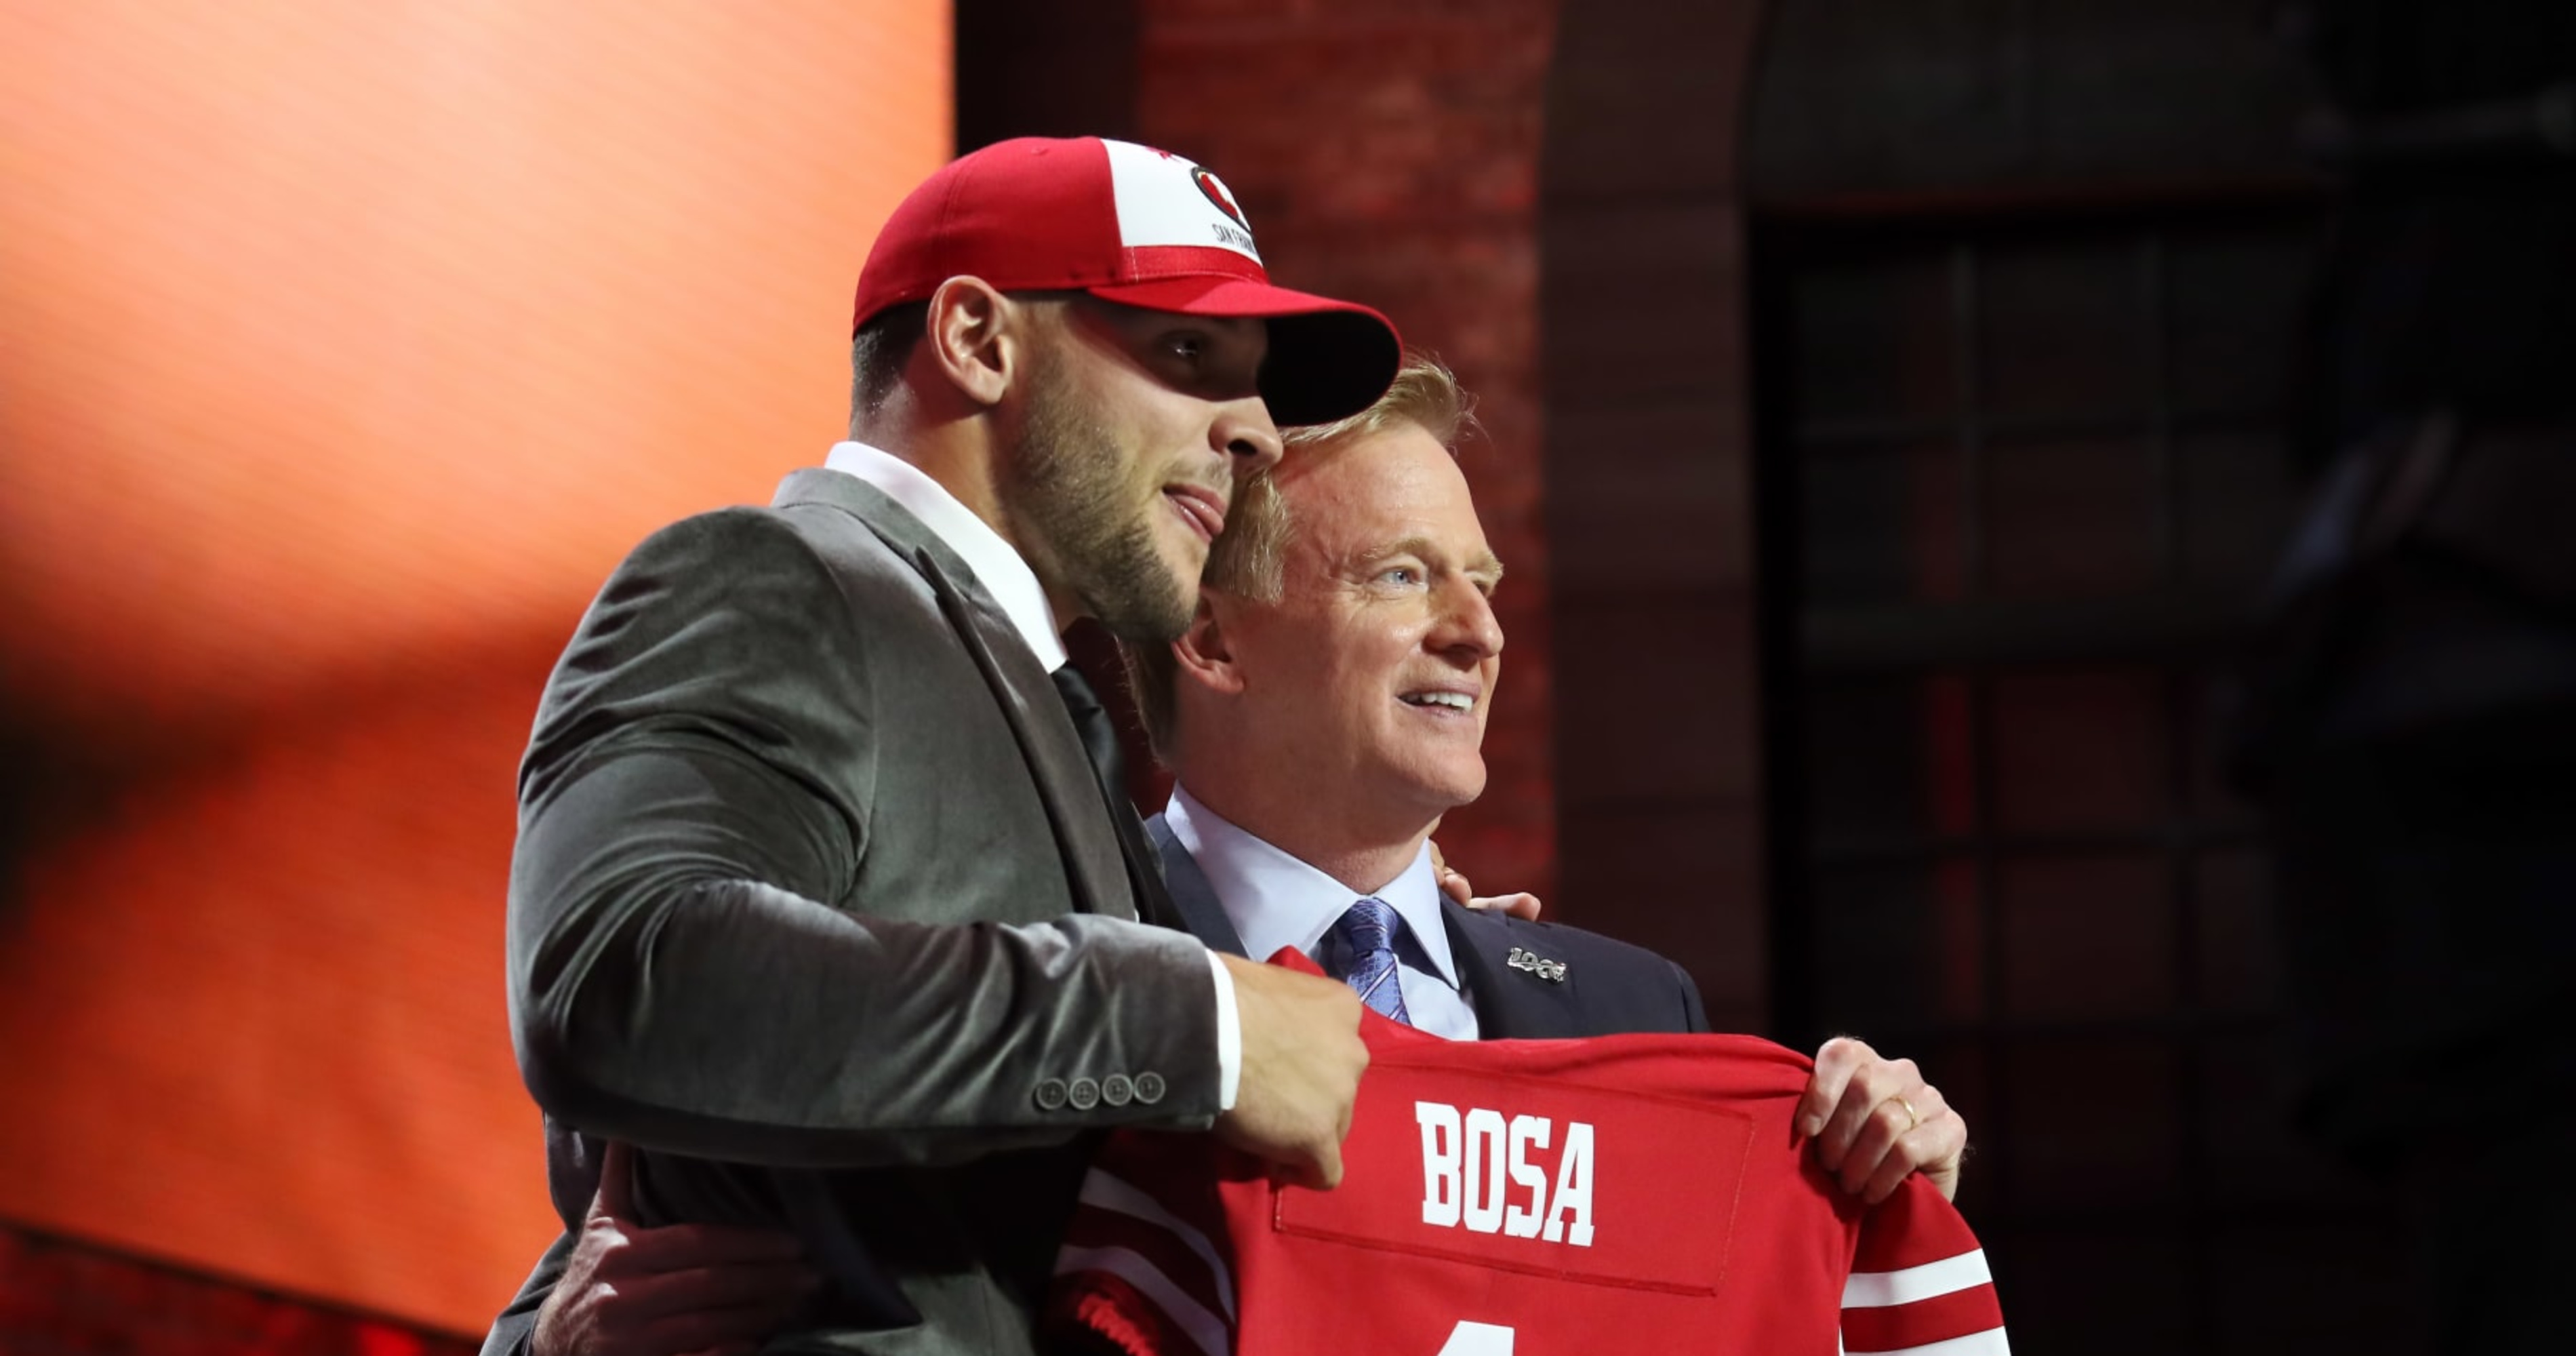 Re-Drafting the 2019 NFL Draft